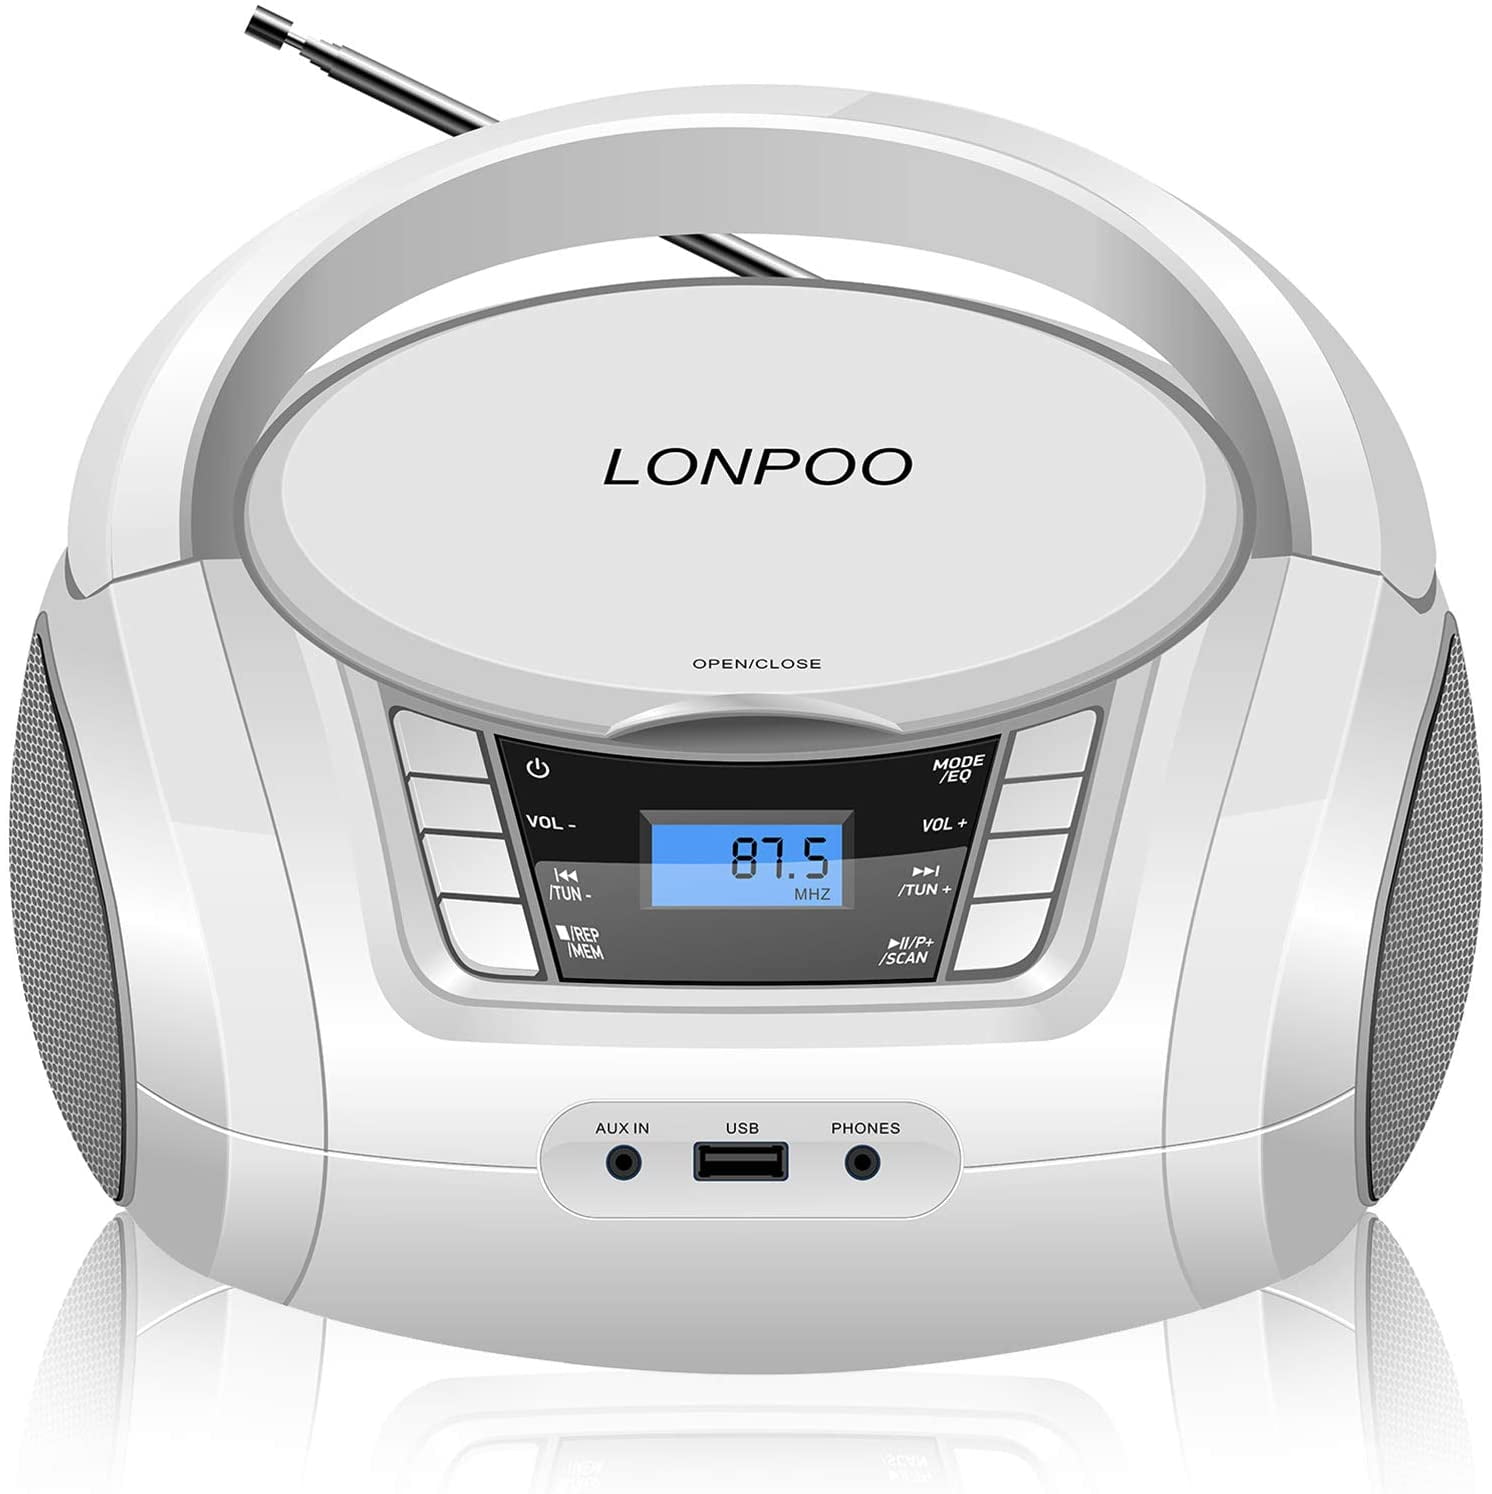 LP-D03 Portable Top-Loading CD MP3 Player (White), Boombox Bluetooth Stereo丨FM Radio Aux in, Headphone Jack and USB Port, Foldable Handle - Walmart.com